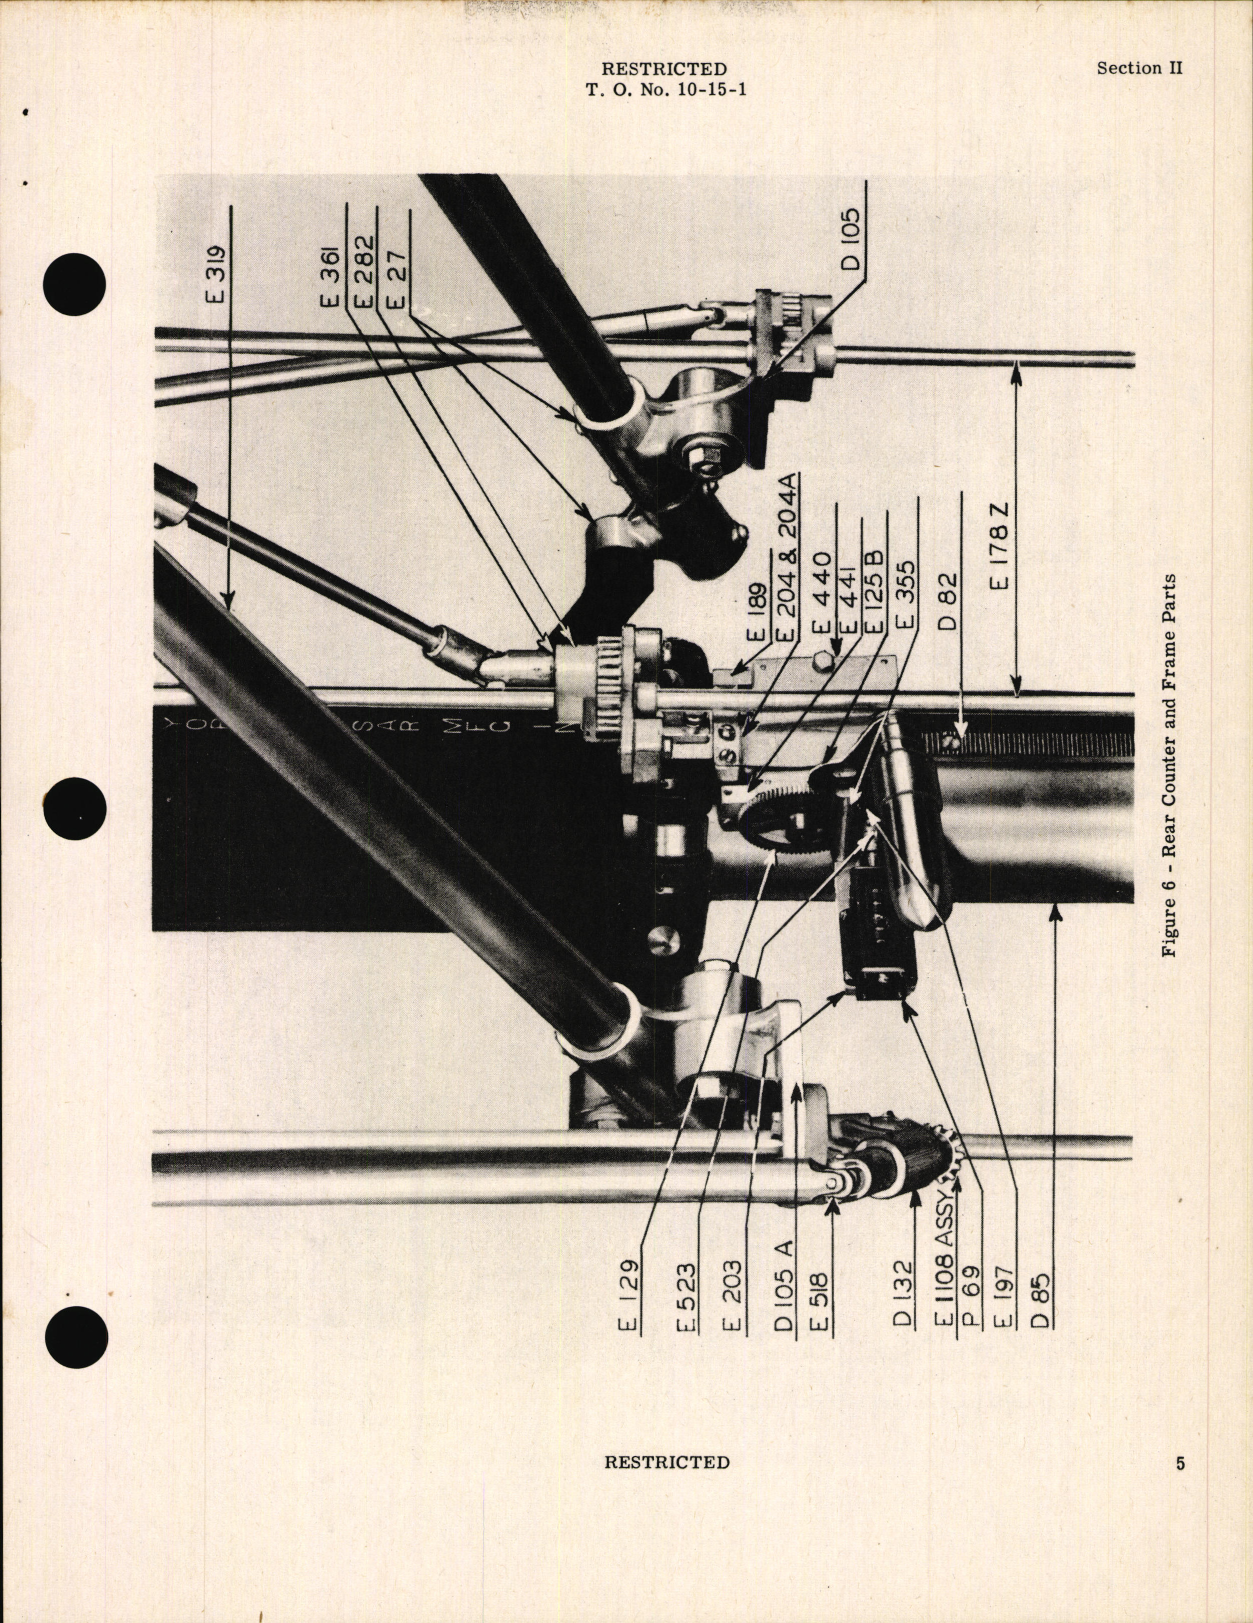 Sample page 7 from AirCorps Library document: Handbook of Instructions with Parts Catalog for Type B-9 Projection Printer